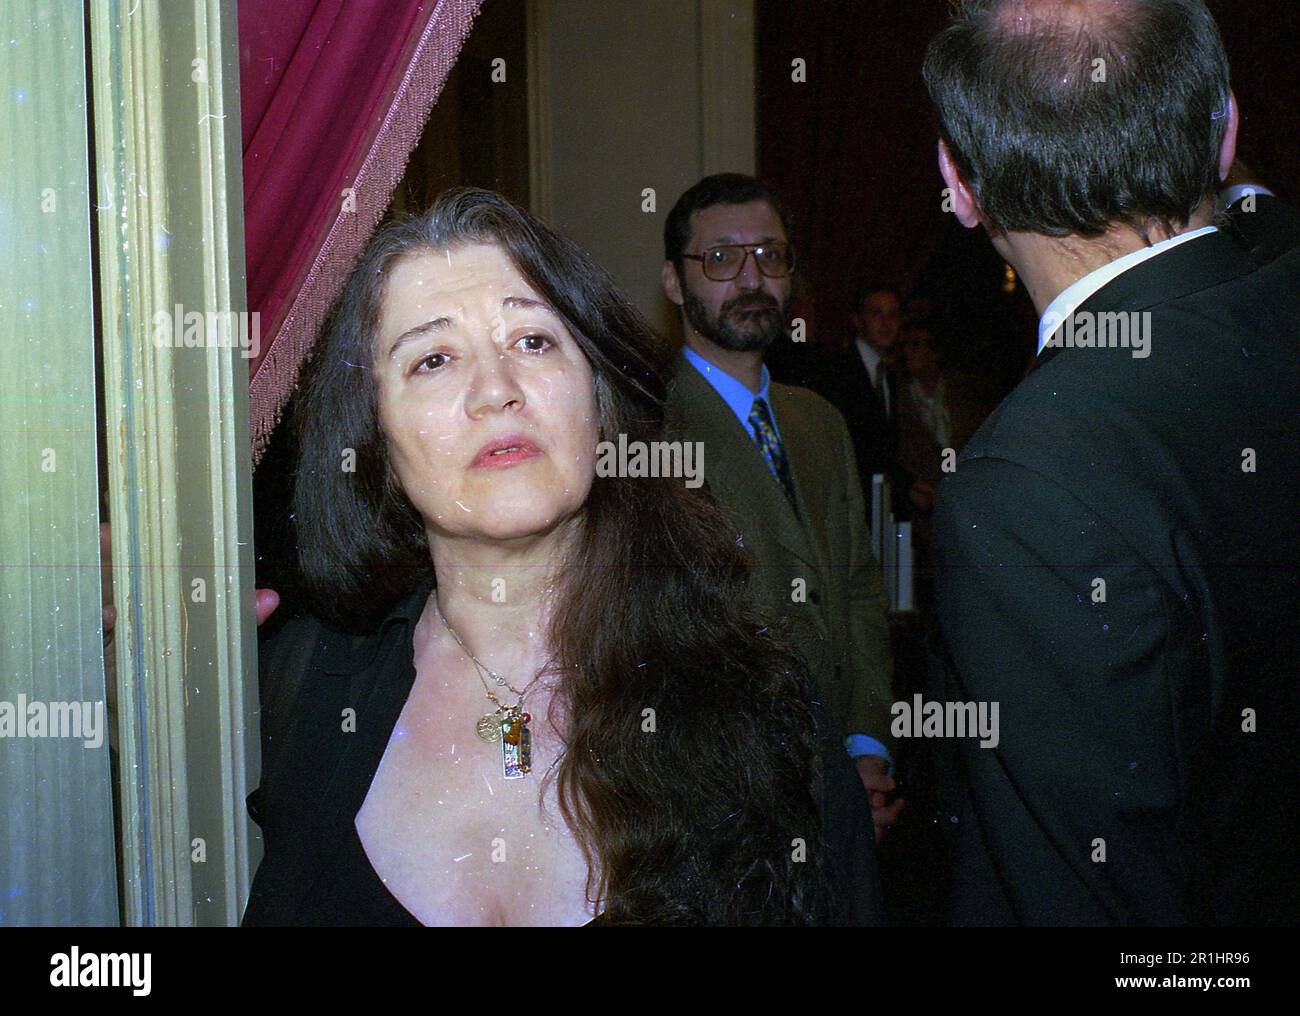 Martha Argerich, Argentine pianist, after a performance at the Teatro Colón, Buenos Aires, Argentina Stock Photo